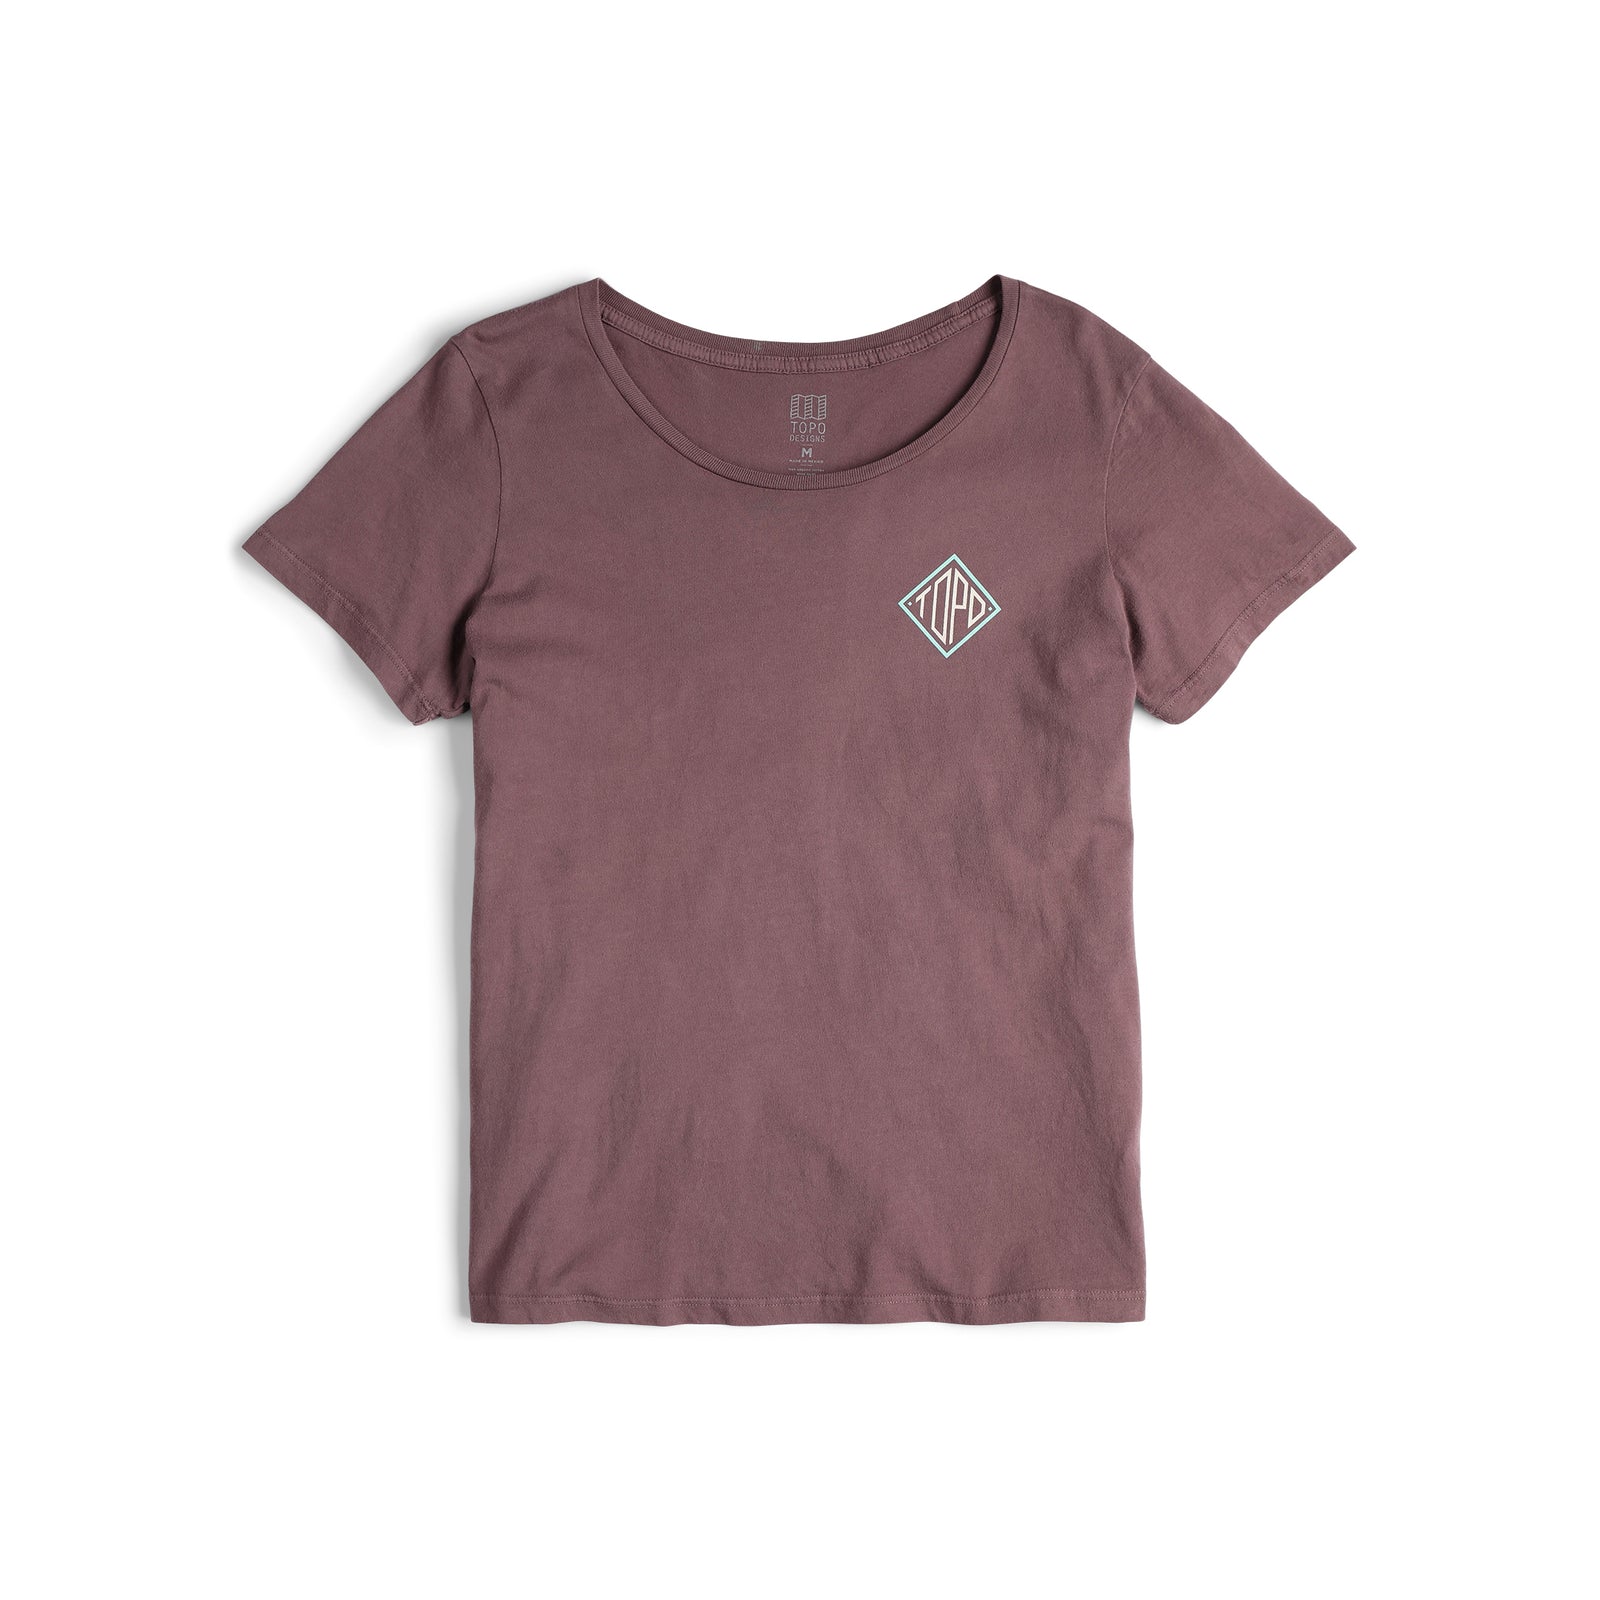 Front view of Topo Designs Women's Small Diamond Tee 100% organic cotton short sleeve graphic logo t-shirt in "peppercorn" purple brown.